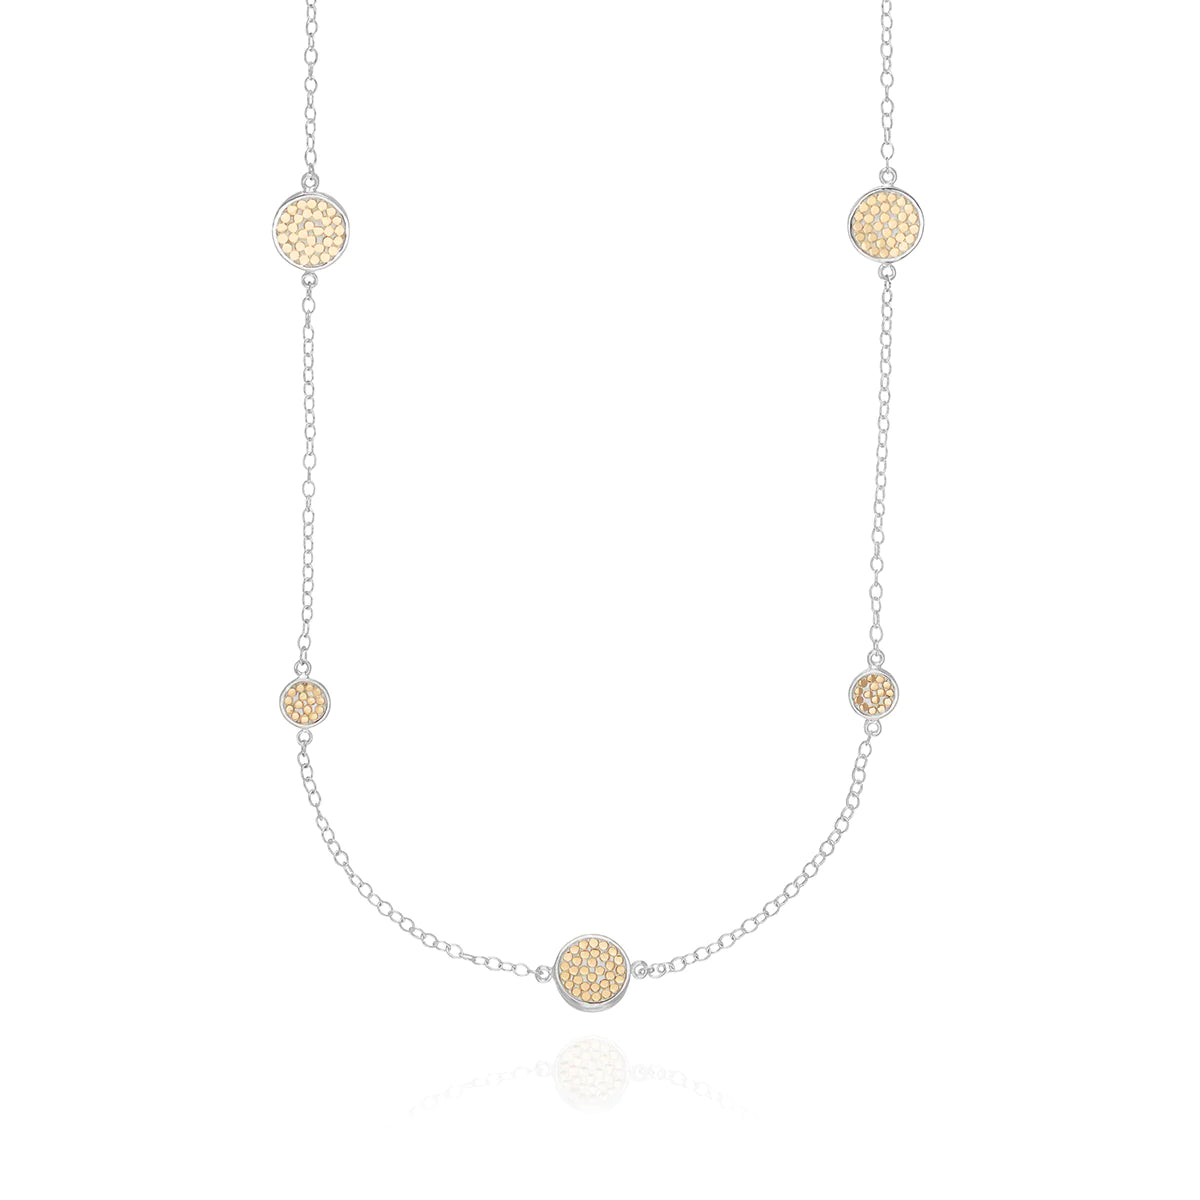 Long silver station necklace with alternating small and medium silver discs with gold dot details